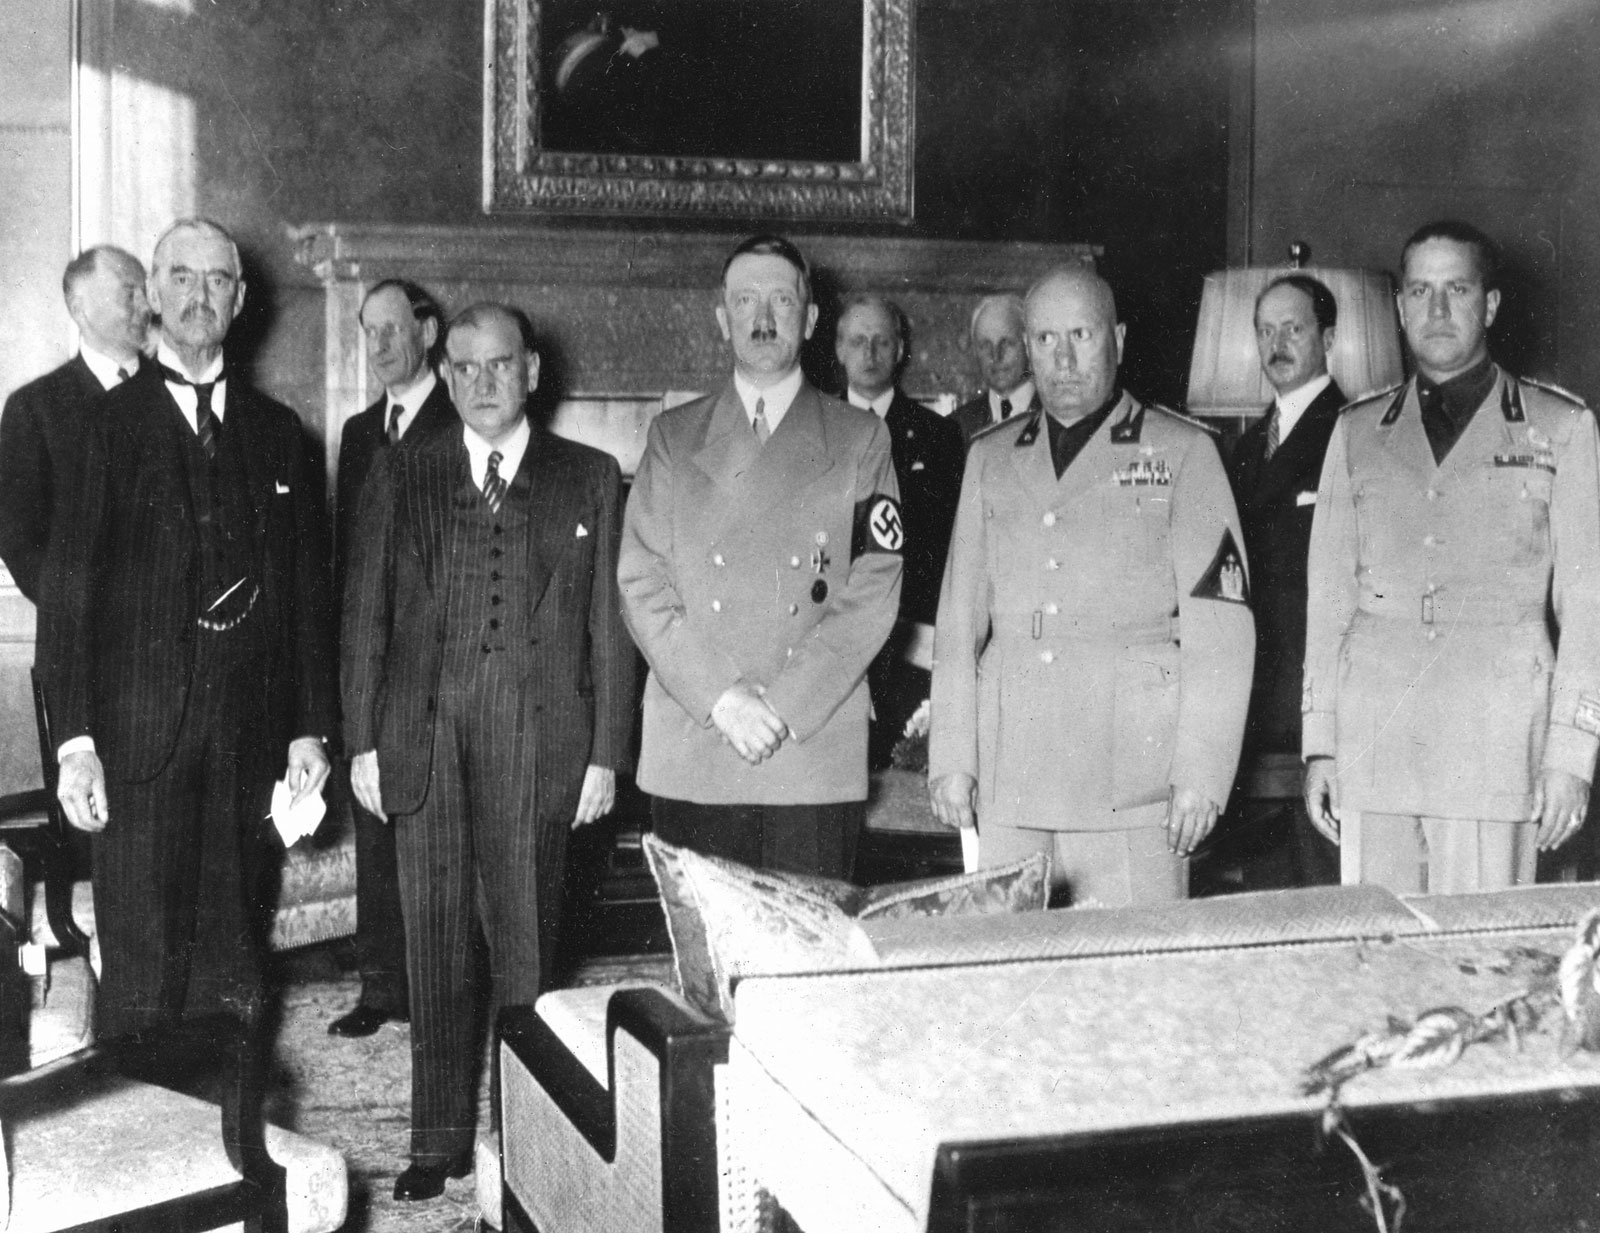 Munich Agreement. Left to right: Neville Chamberlain, Édouard Daladier, Adolf Hitler, Benito Mussolini & Count Galeazzo Ciano meeting in Munich, September, 1938.